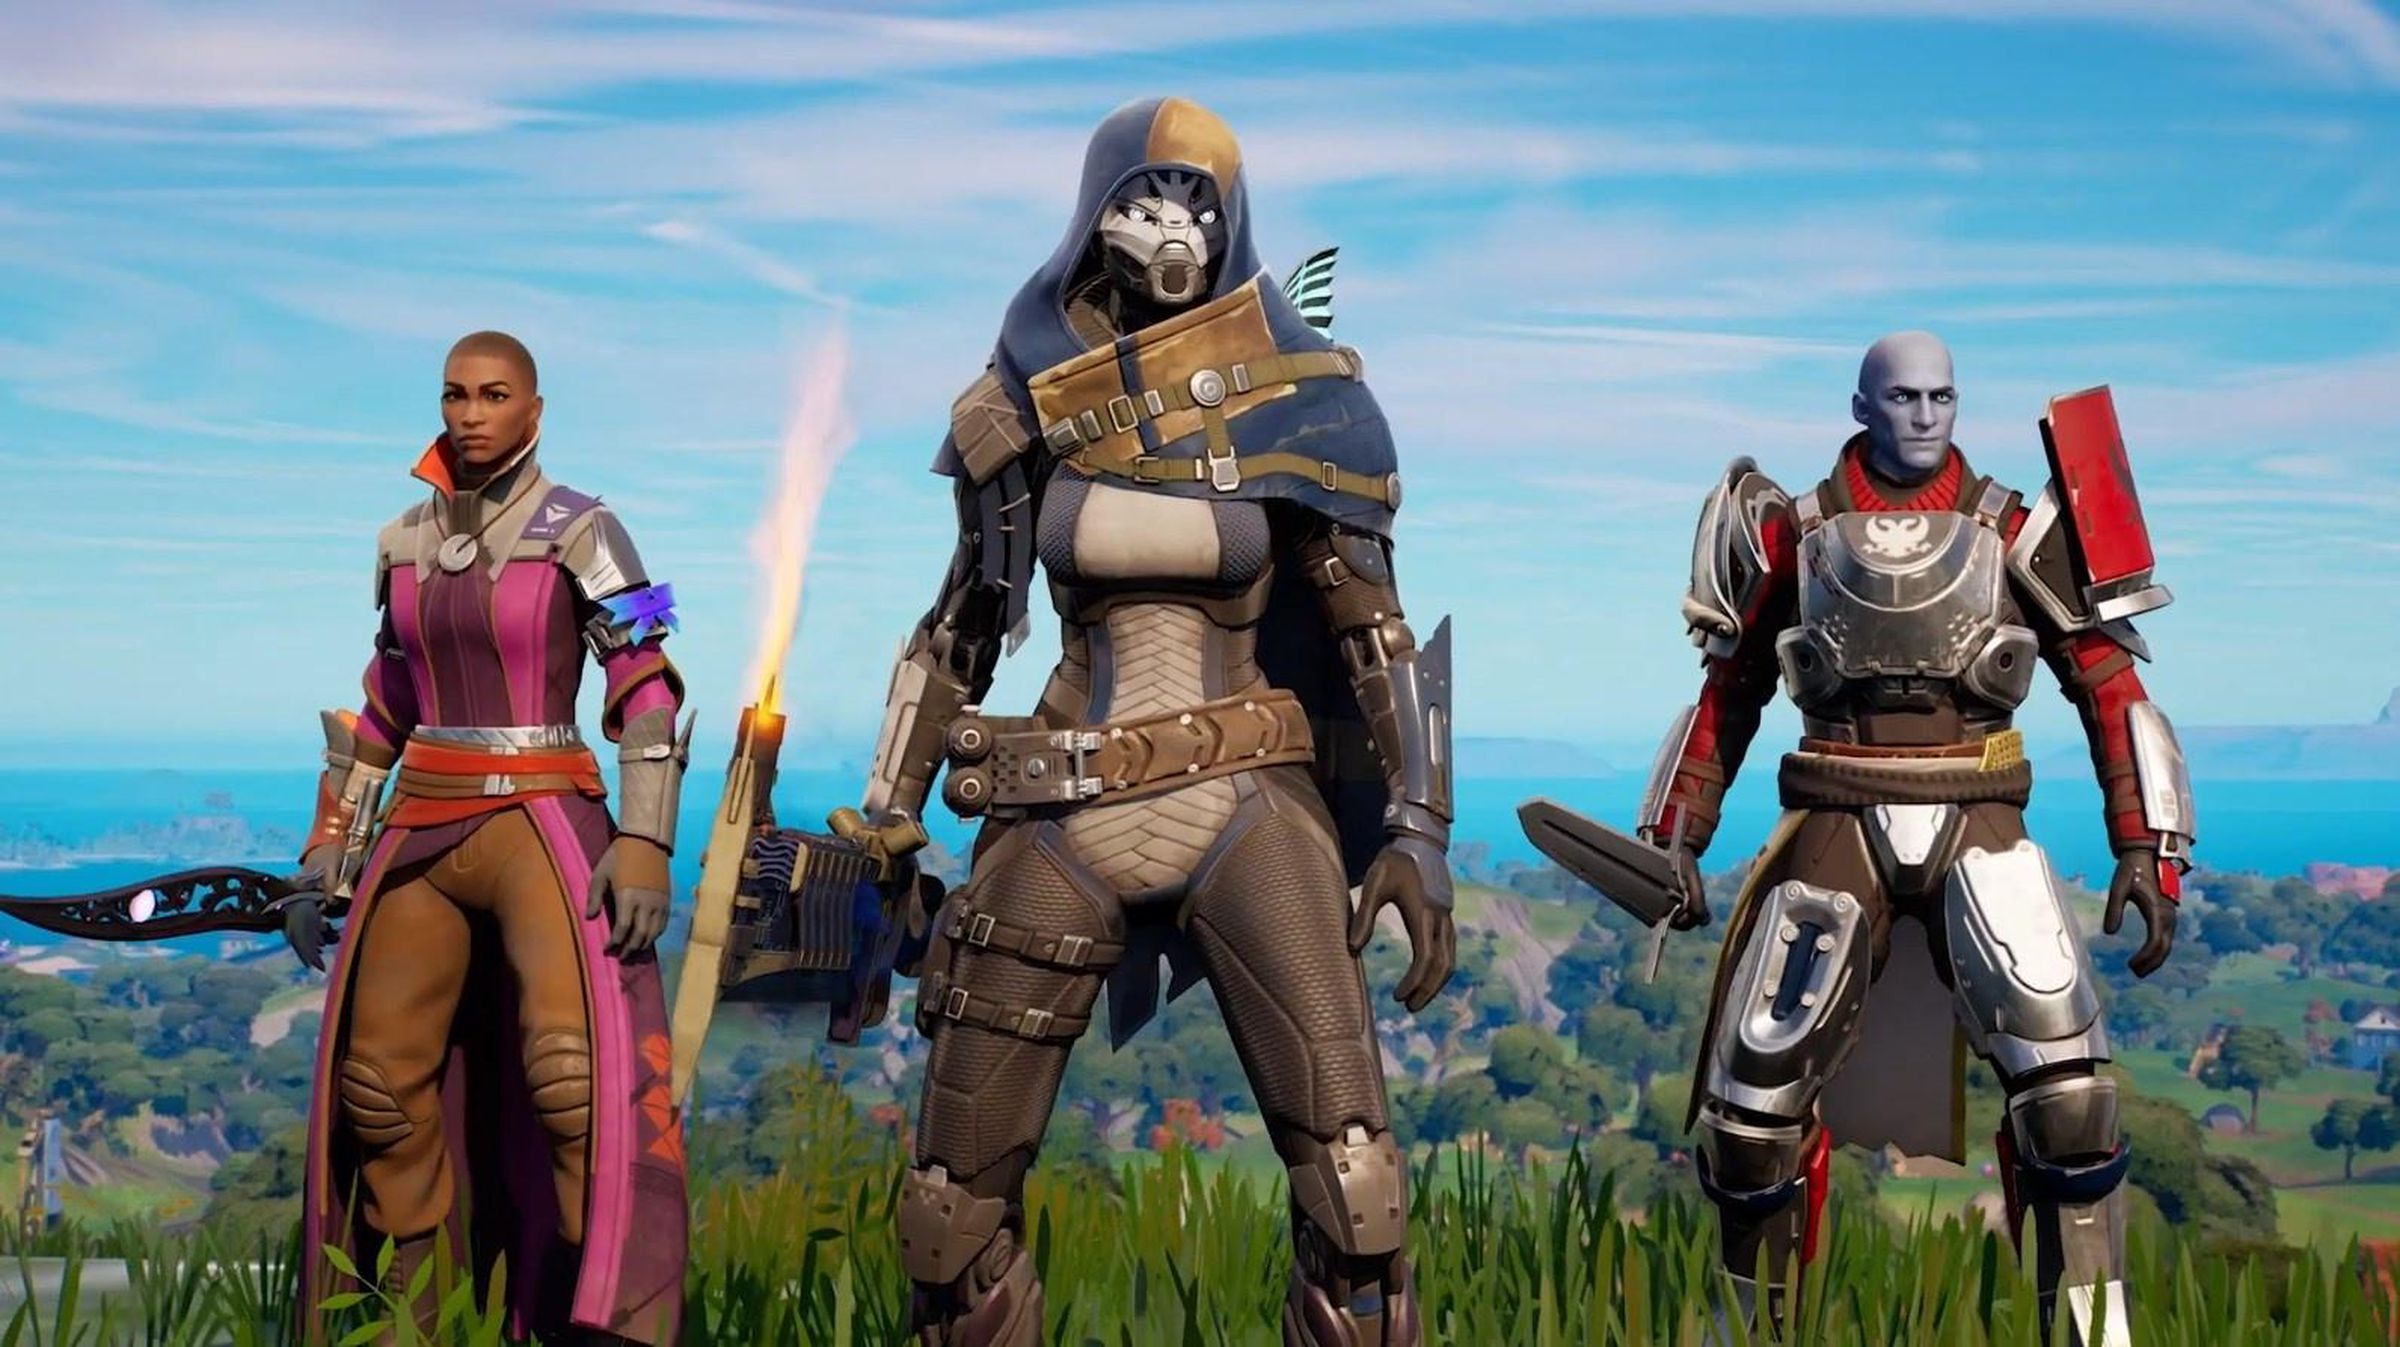 Destiny 2 characters in Fortnite.